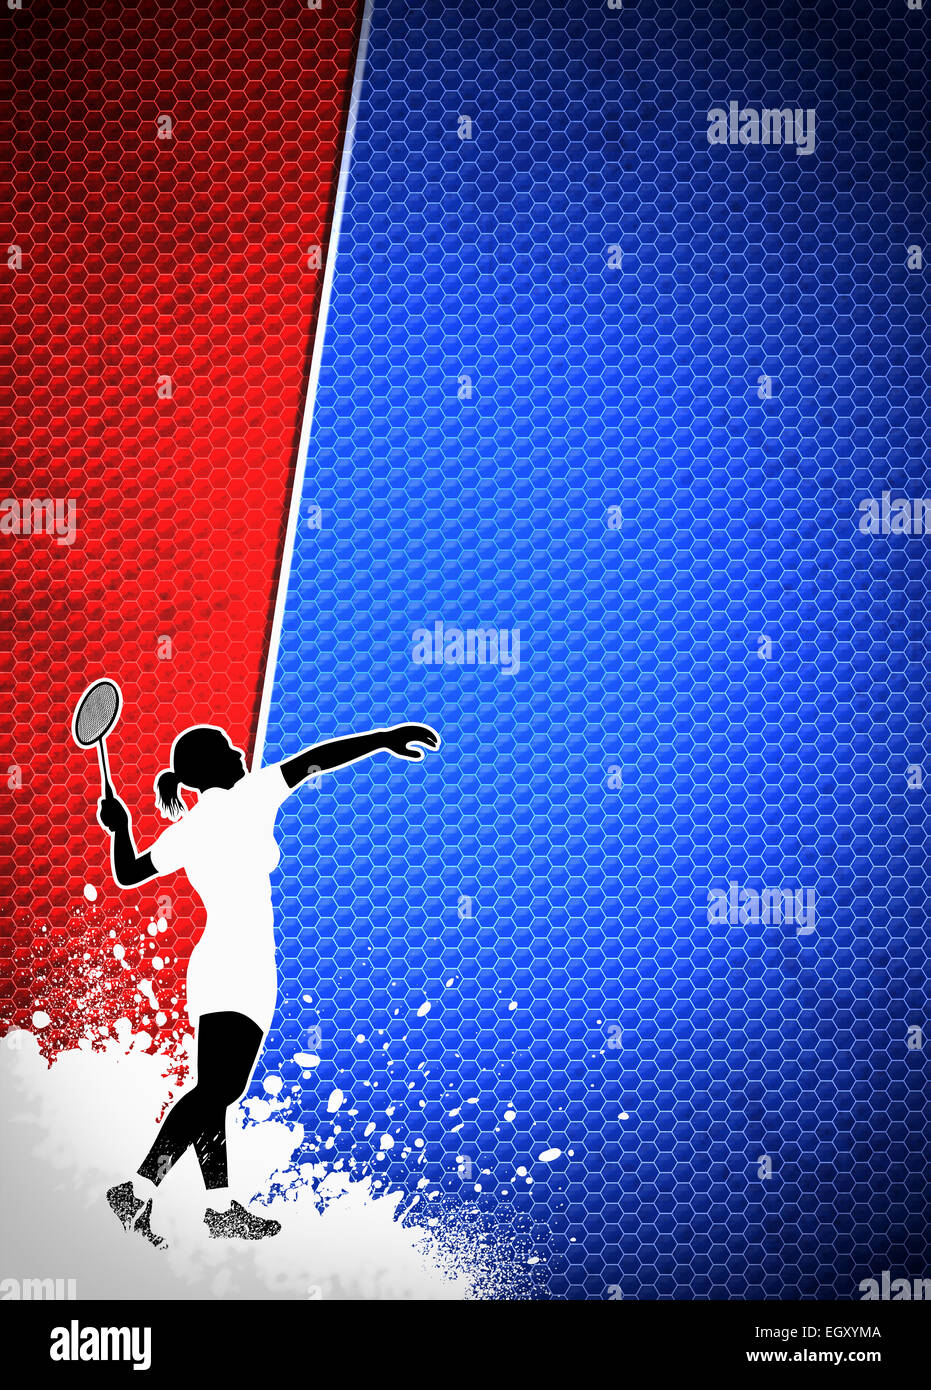 Badminton sport invitation poster or flyer background with empty space  Stock Photo - Alamy